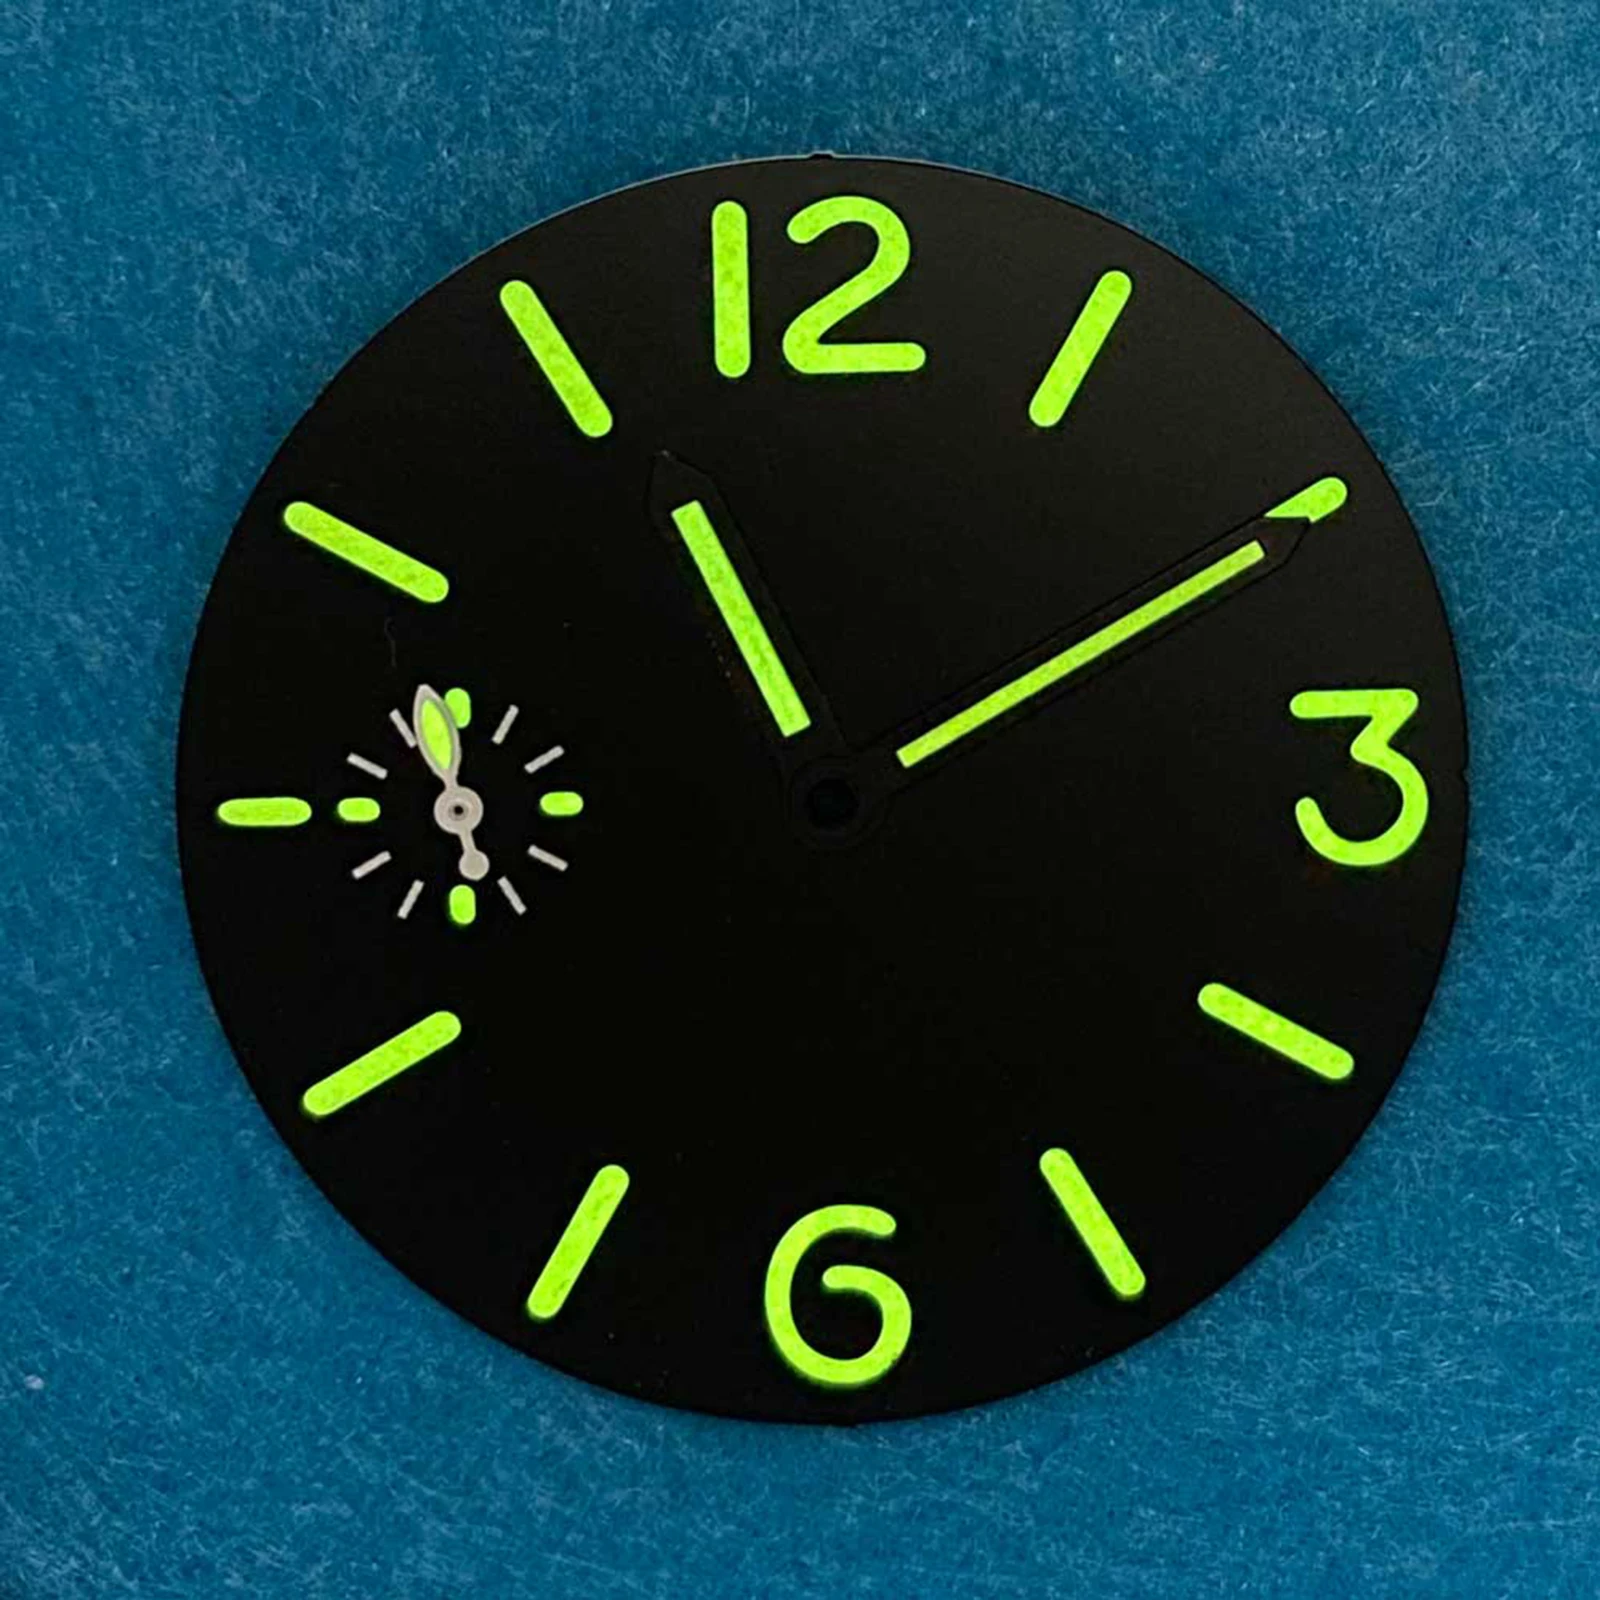 

Green Luminous 36mm Watch Dial With small Index Hands Repair Parts for ETA6497/ST36 Movement